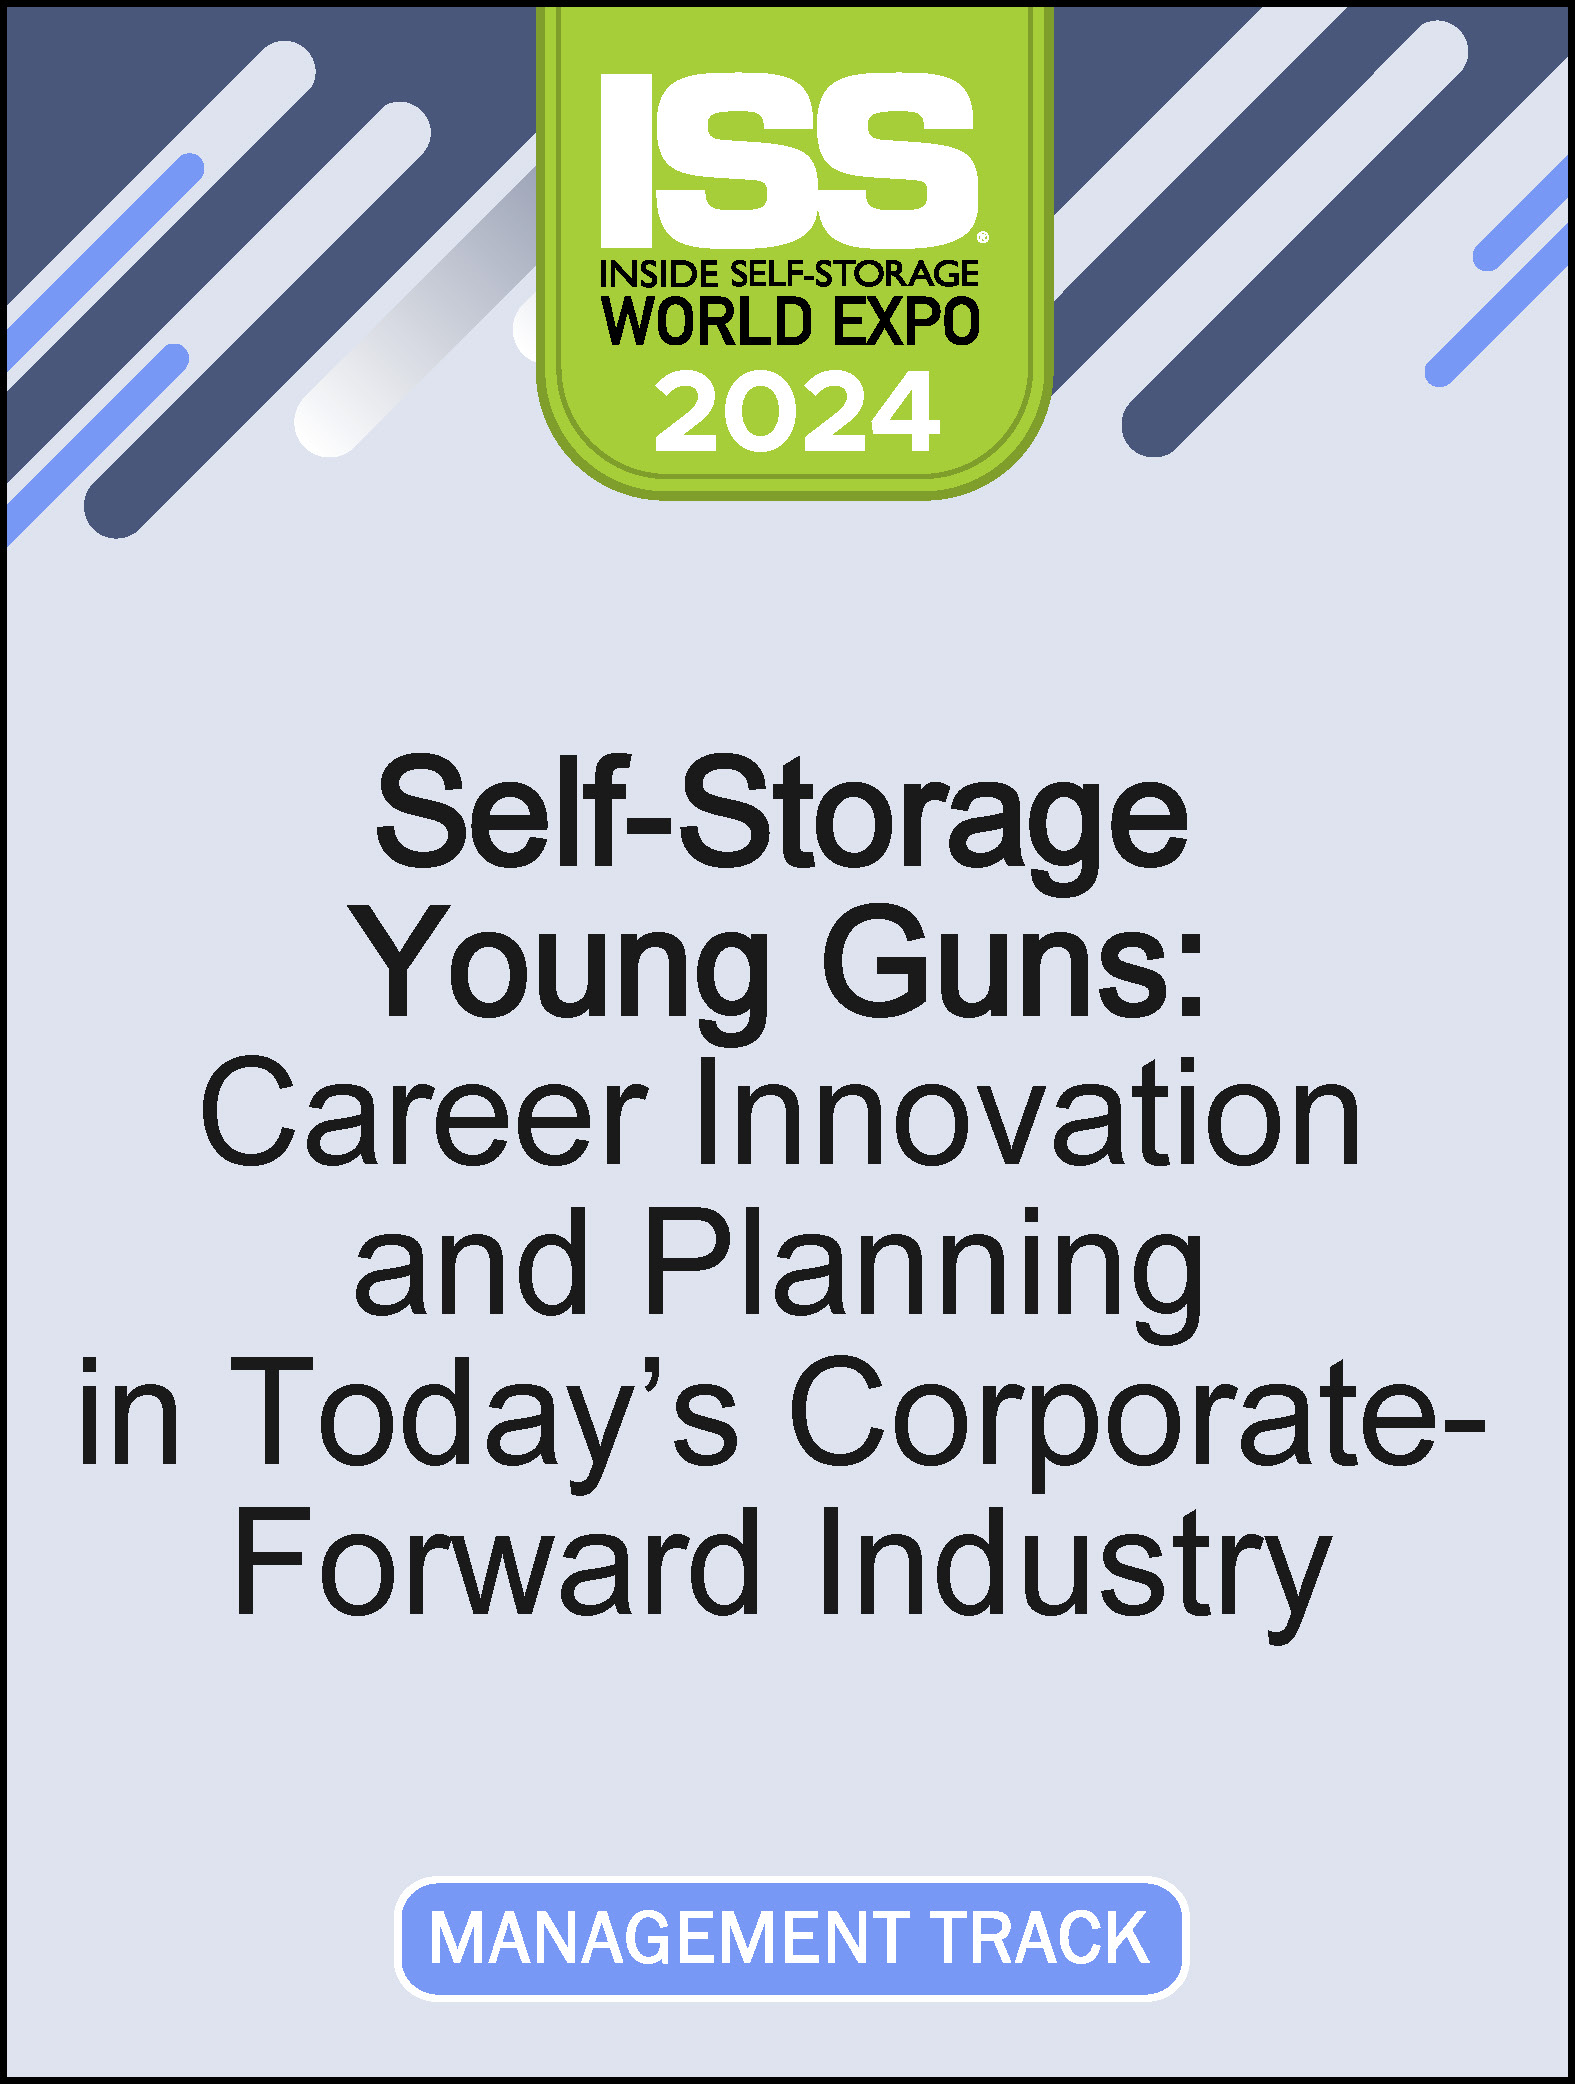 Video Pre-Order Sub - Self-Storage Young Guns: Career Innovation and Planning in Today’s Corporate-Forward Industry